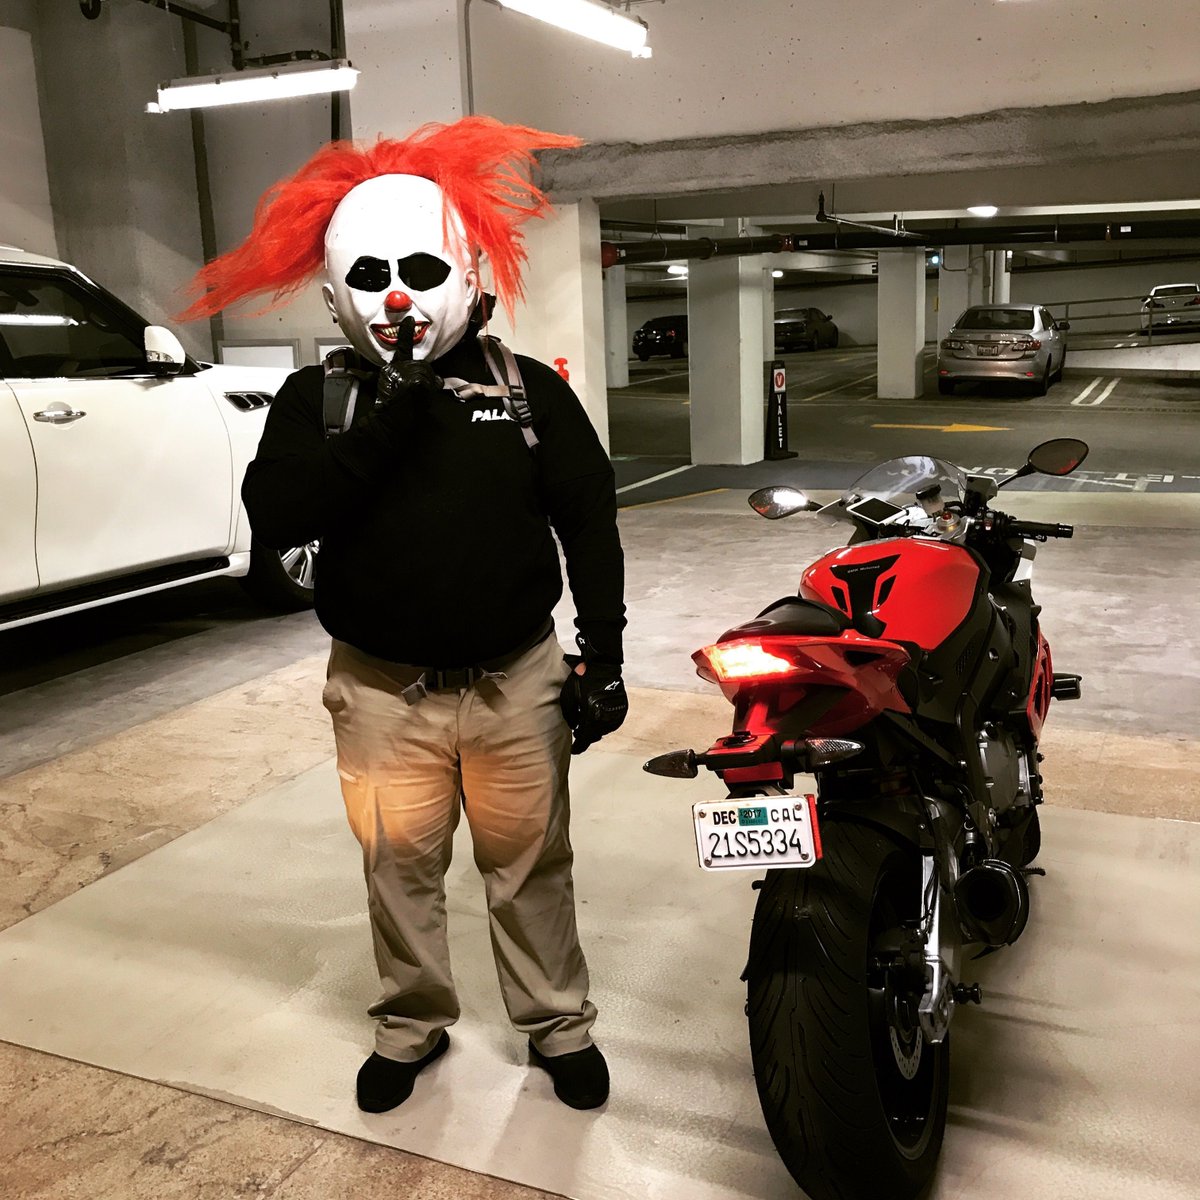 NOT who you wanna run into in a parking garage.. https://t.co/HFYrE0Ynch https://t.co/wXYhgvSysv